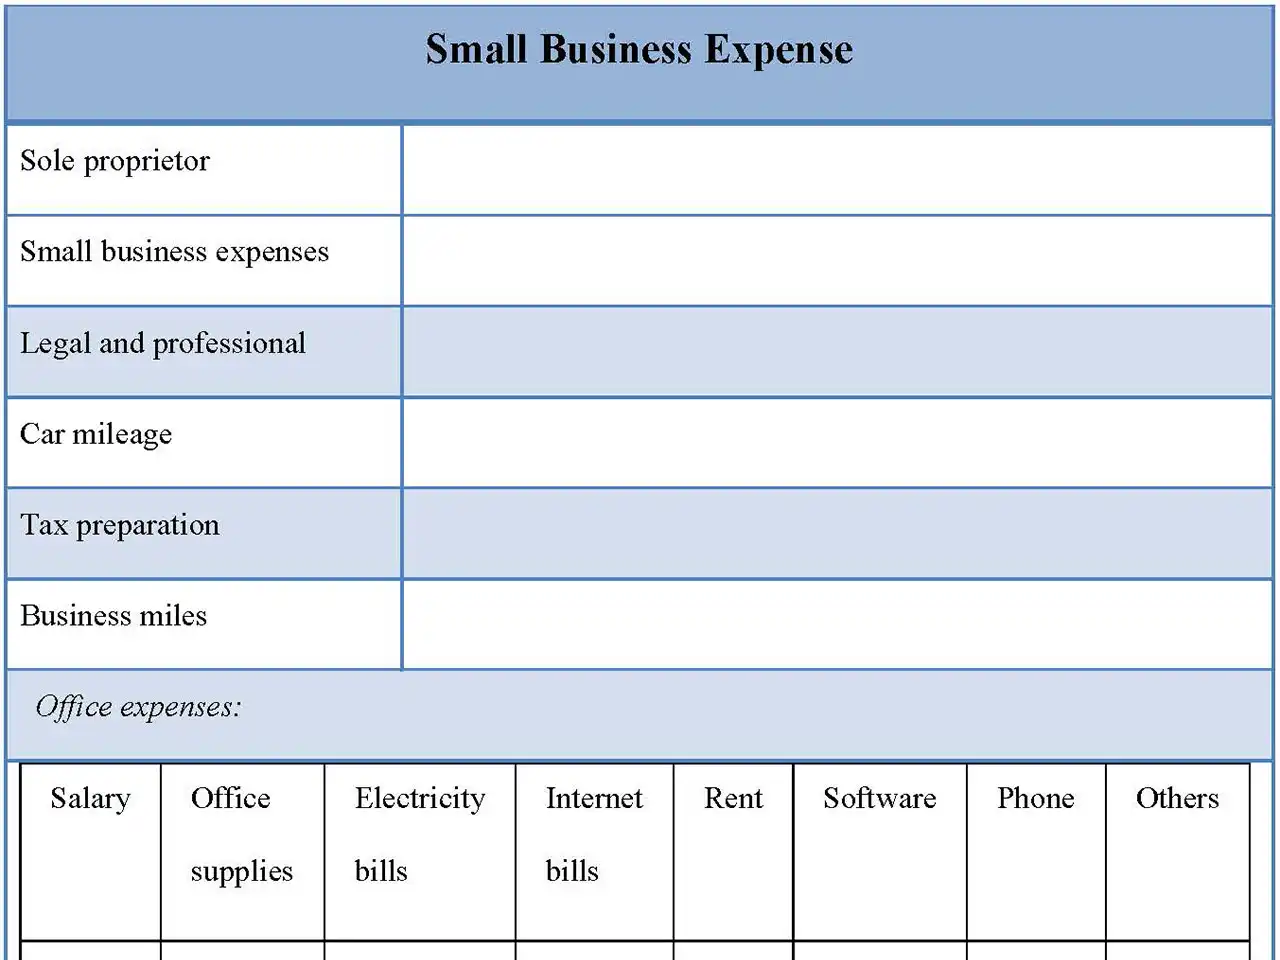 Small Business Expense Form